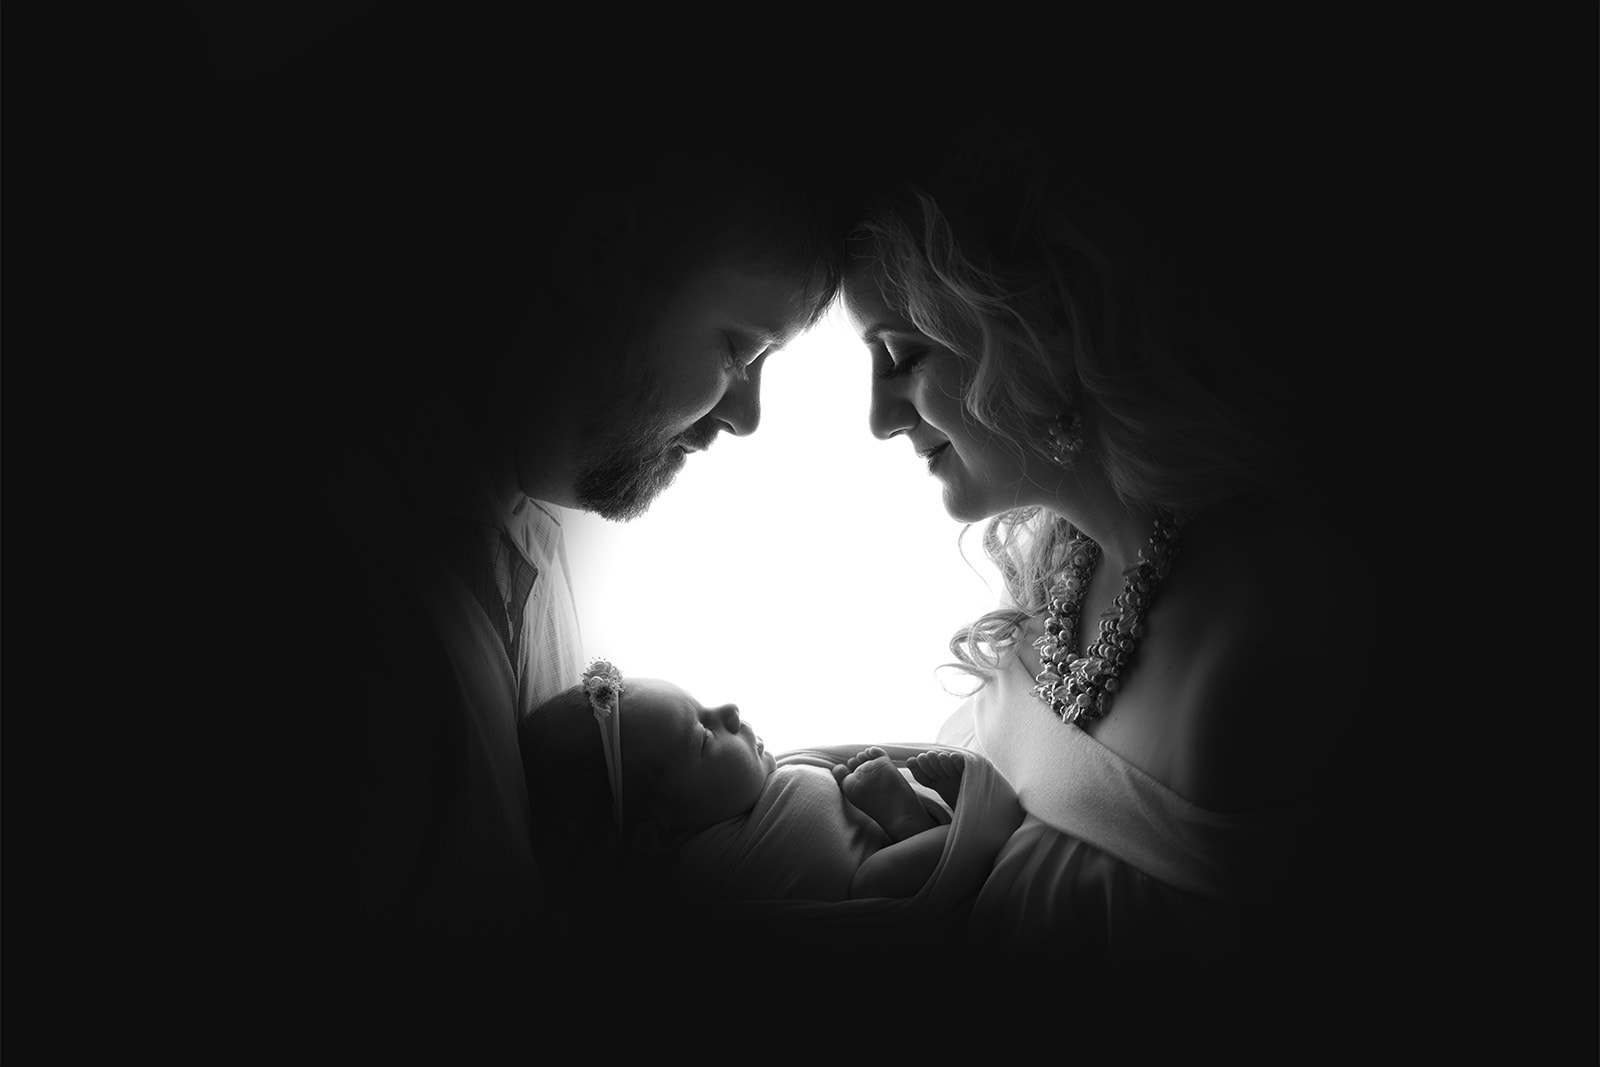 backlit family photo with newborn